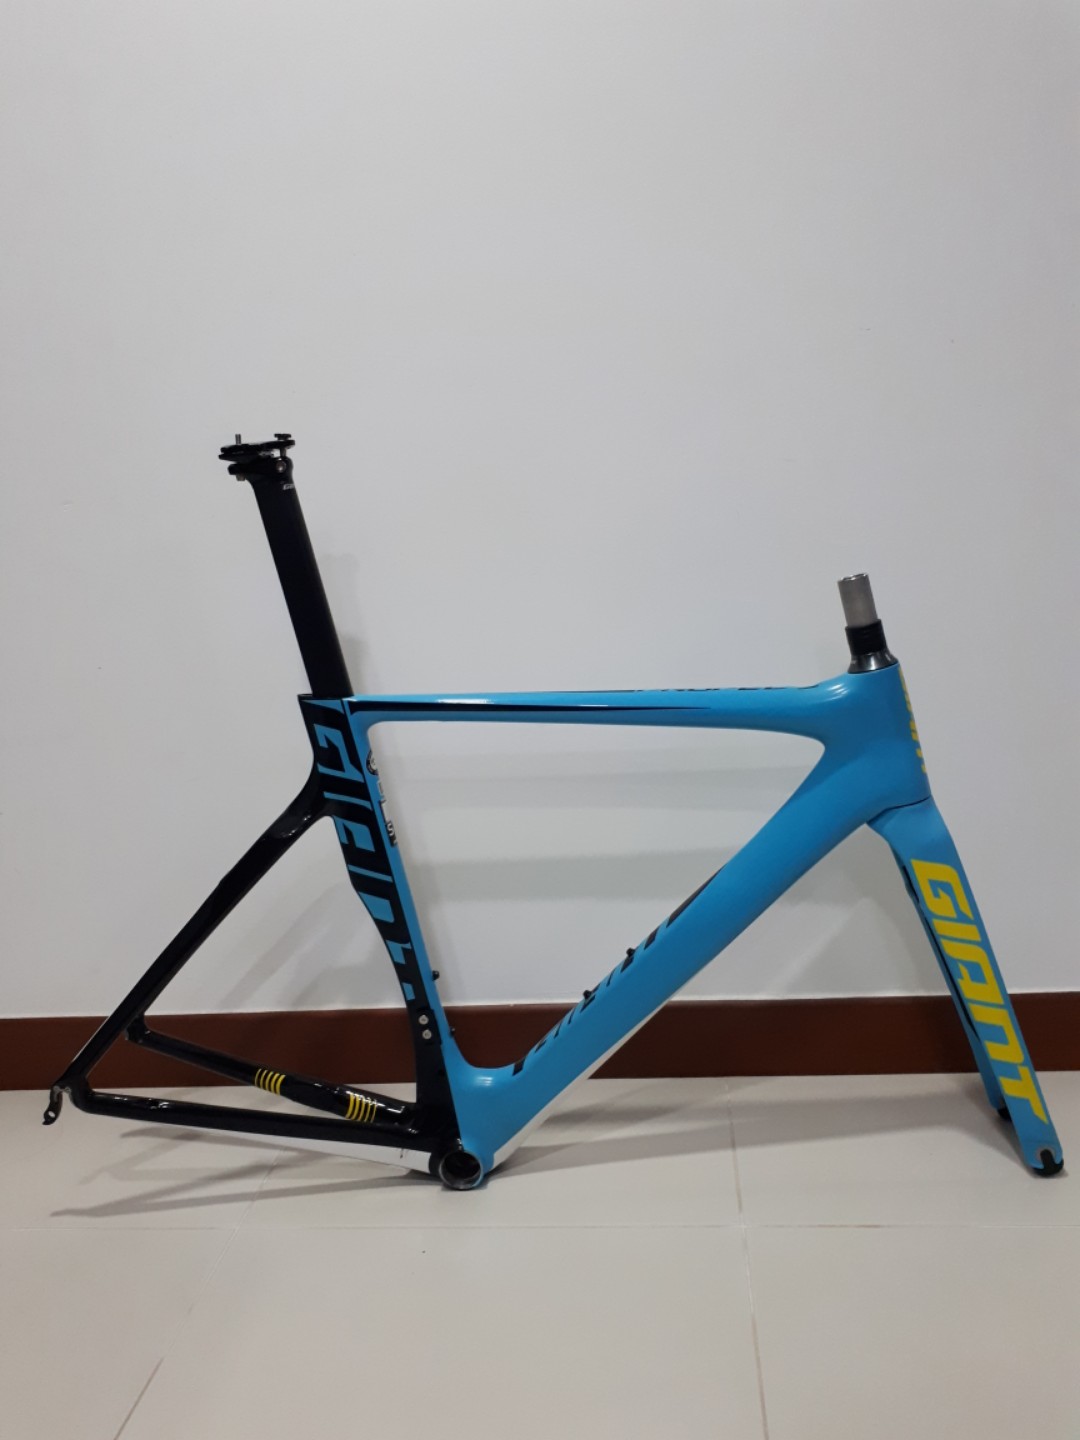 giant propel advanced 0 carbon